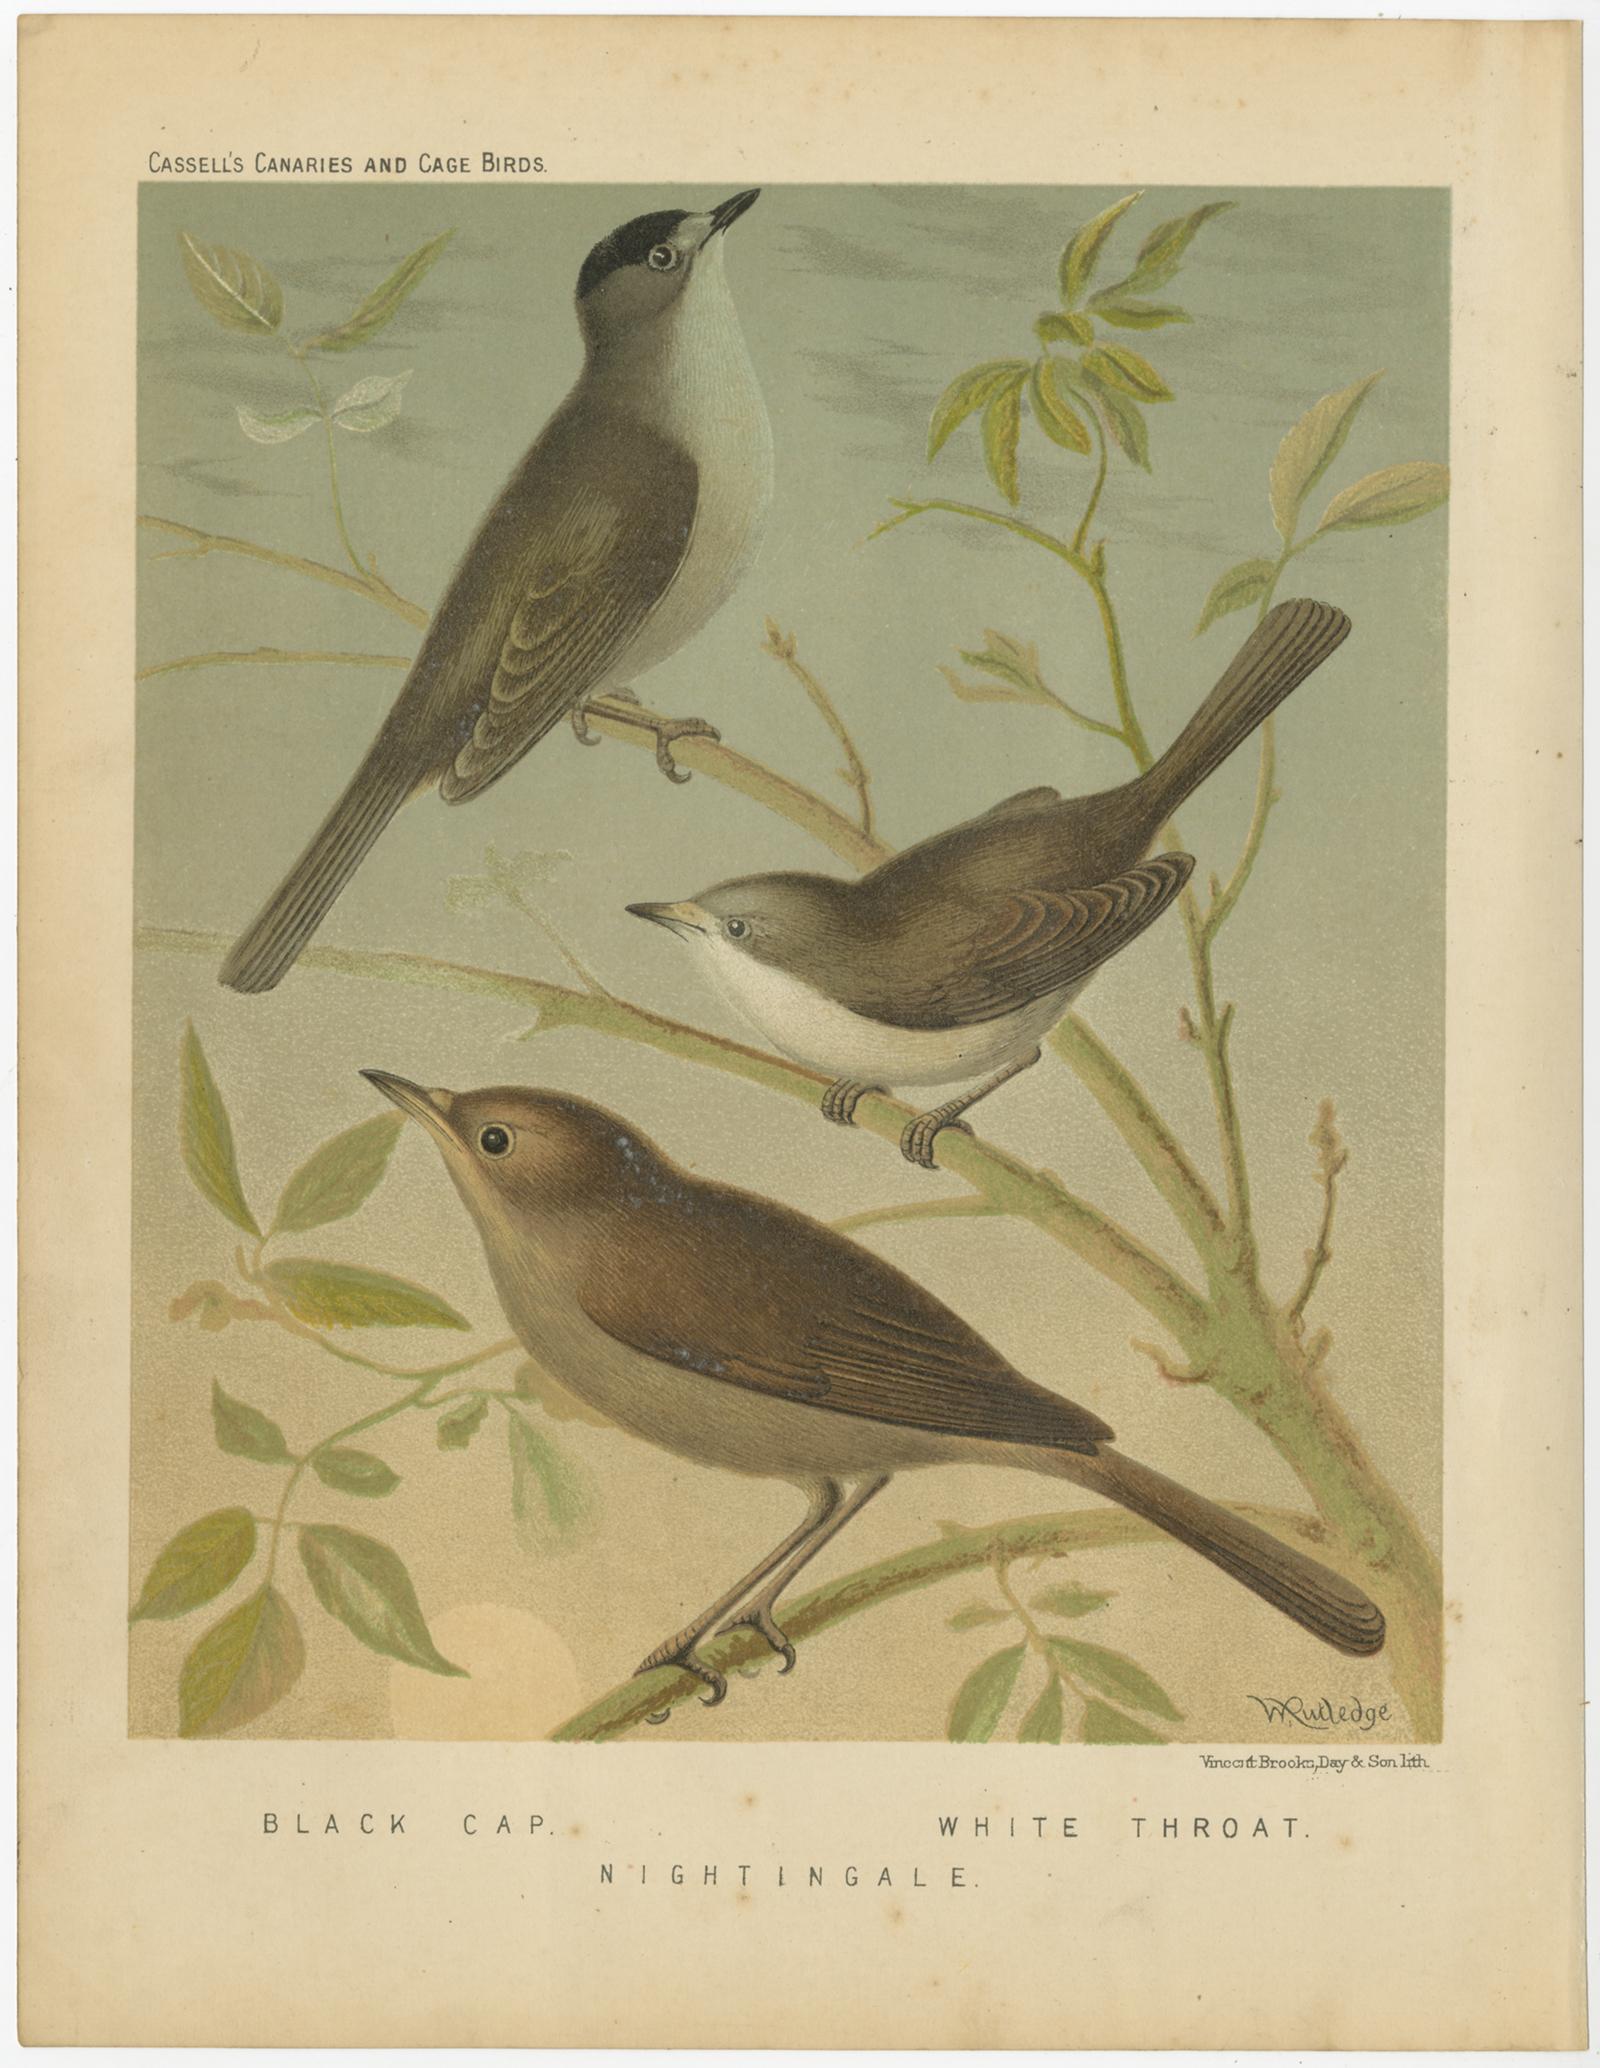 Antique bird print titled '1. Black Cap 2. White Throat 3. Nightingale' Old bird print depicting the Black Cap, White Throat, Nightingale. This print originates from: 'Illustrated book of canaries and cage-birds' by W. A. Blackston, W. Swaysland and